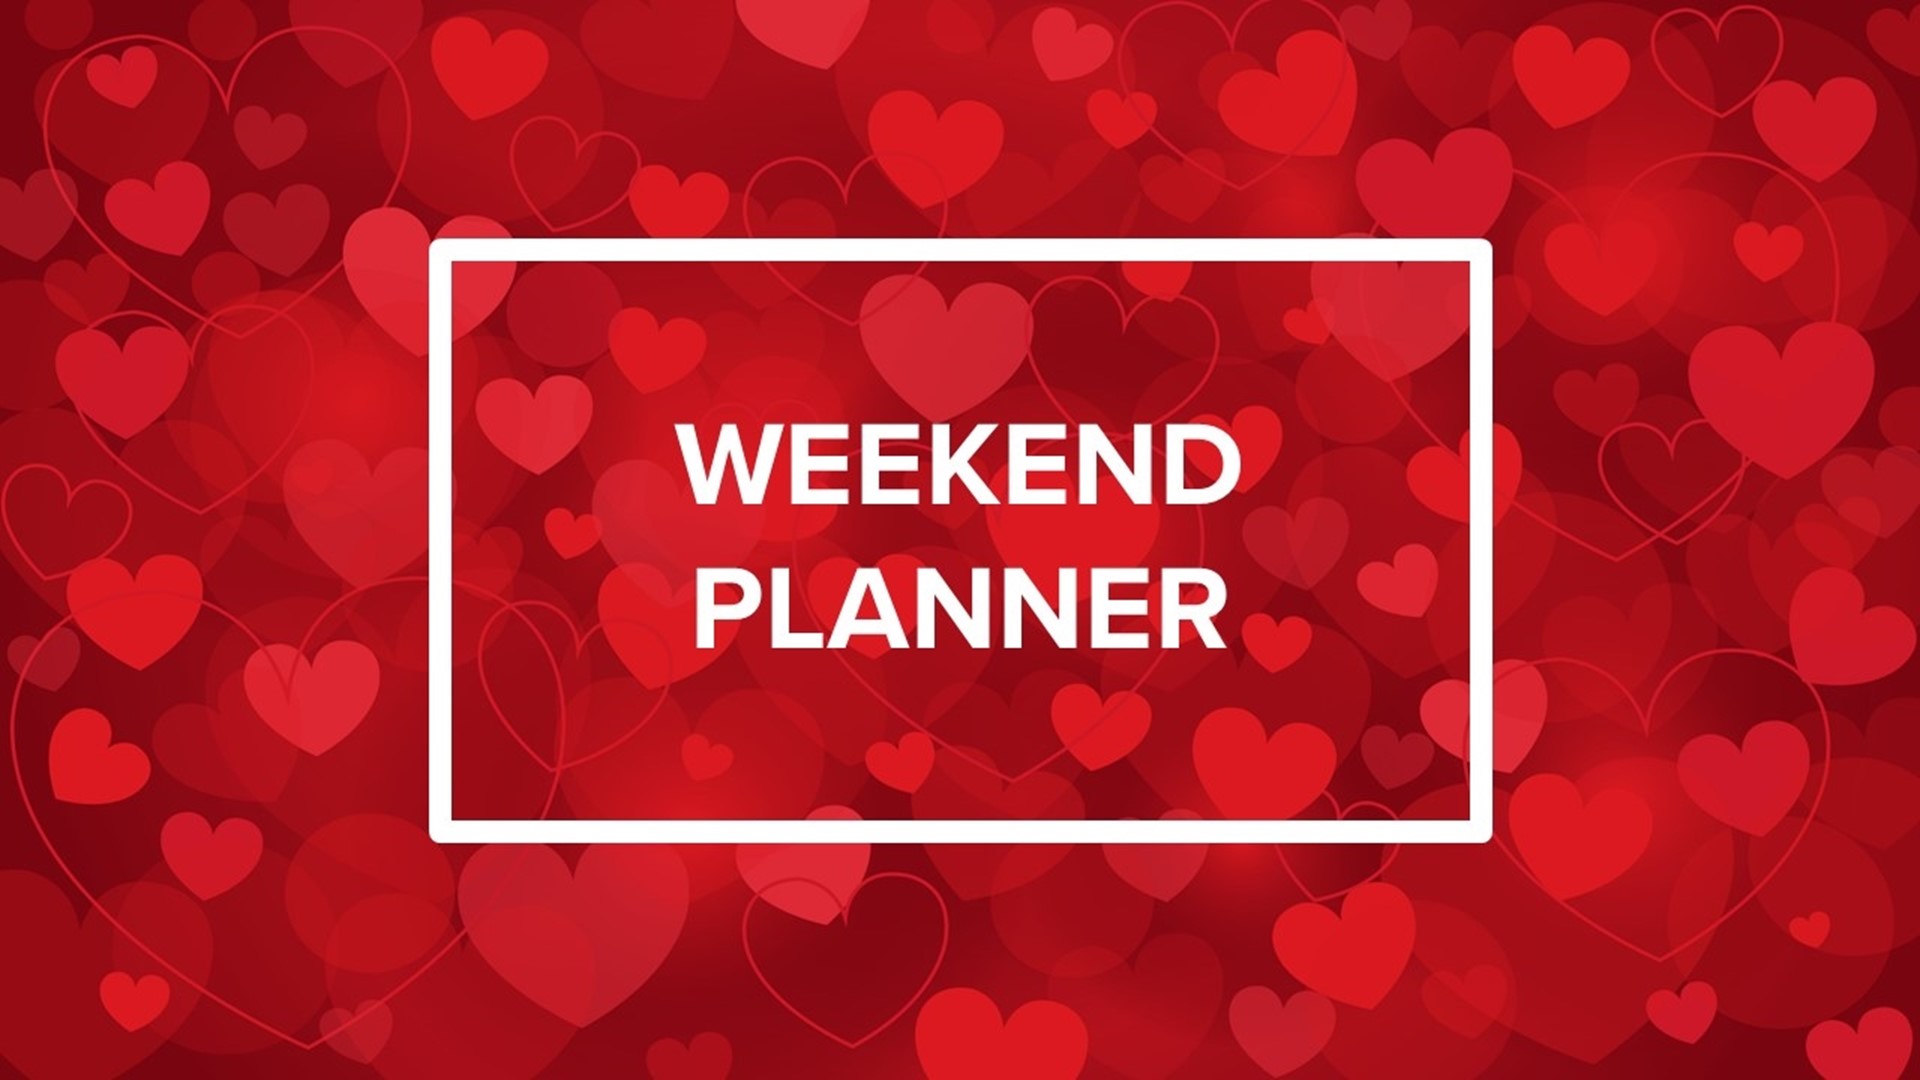 It's the weekend before Valentine's Day and there are many activities for you and your better half.